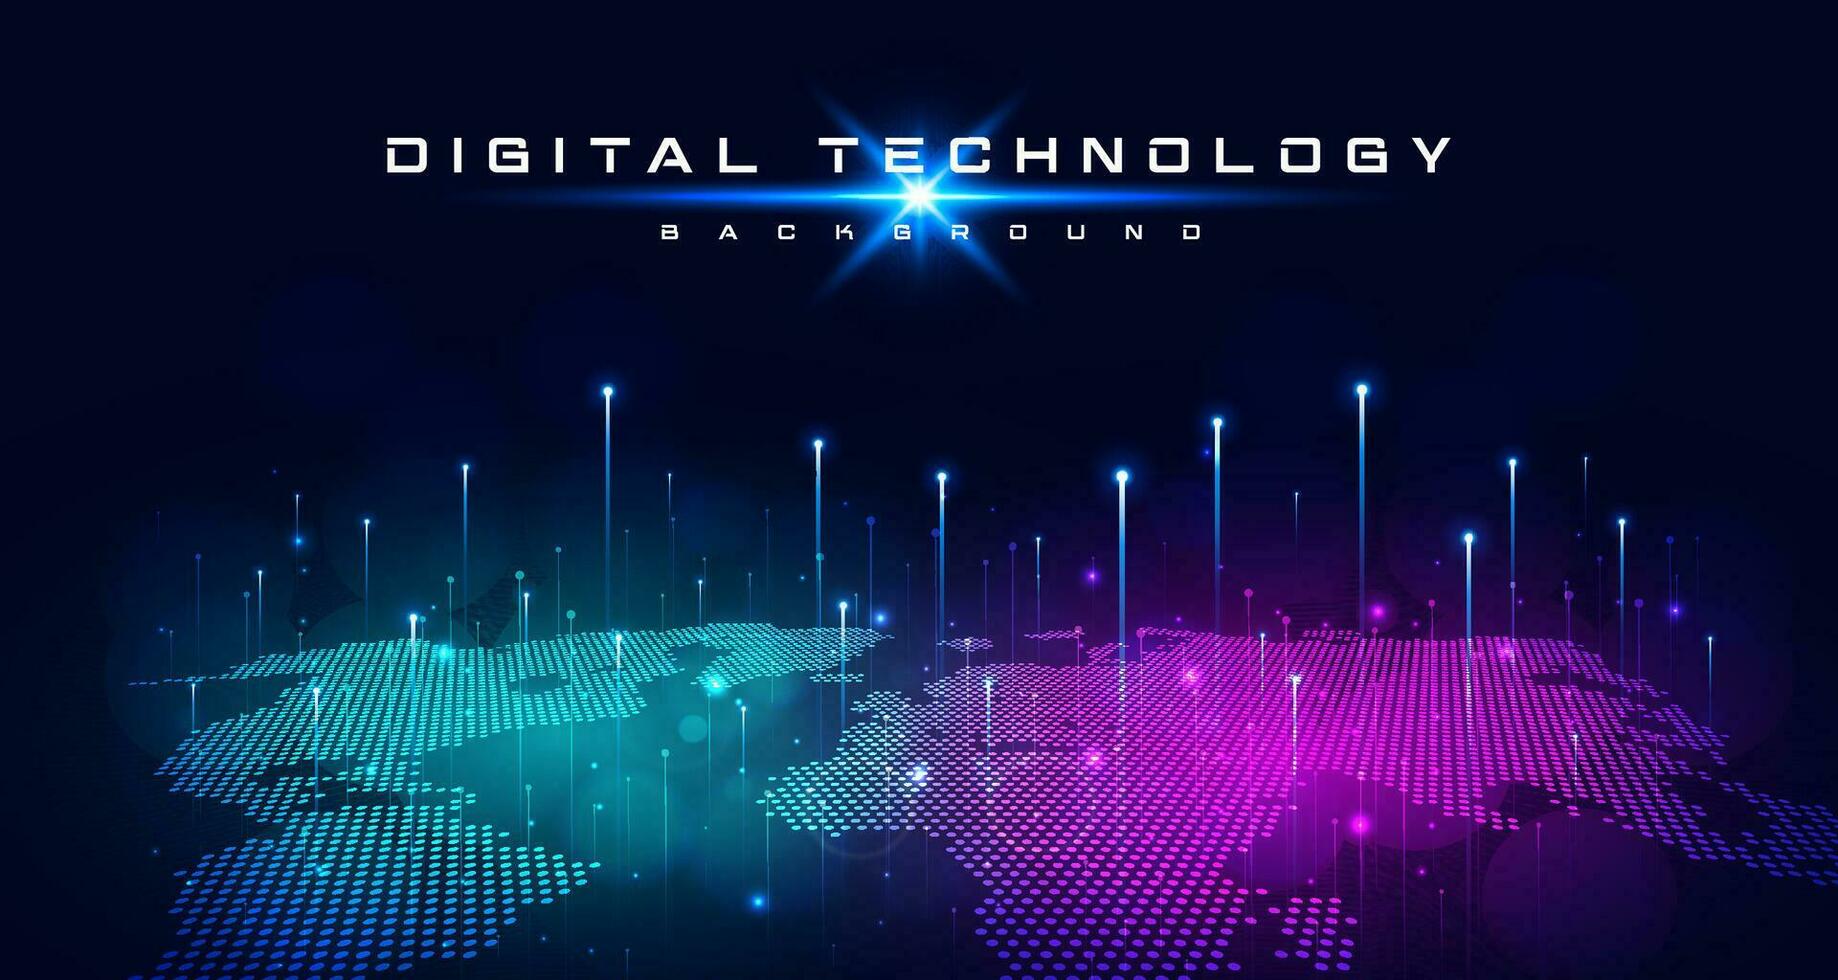 Digital technology speed internet network connection blue purple background, cyber information, abstract speed connect communication, innovation metaverse futuristic tech, Ai big data, illustration 3d vector